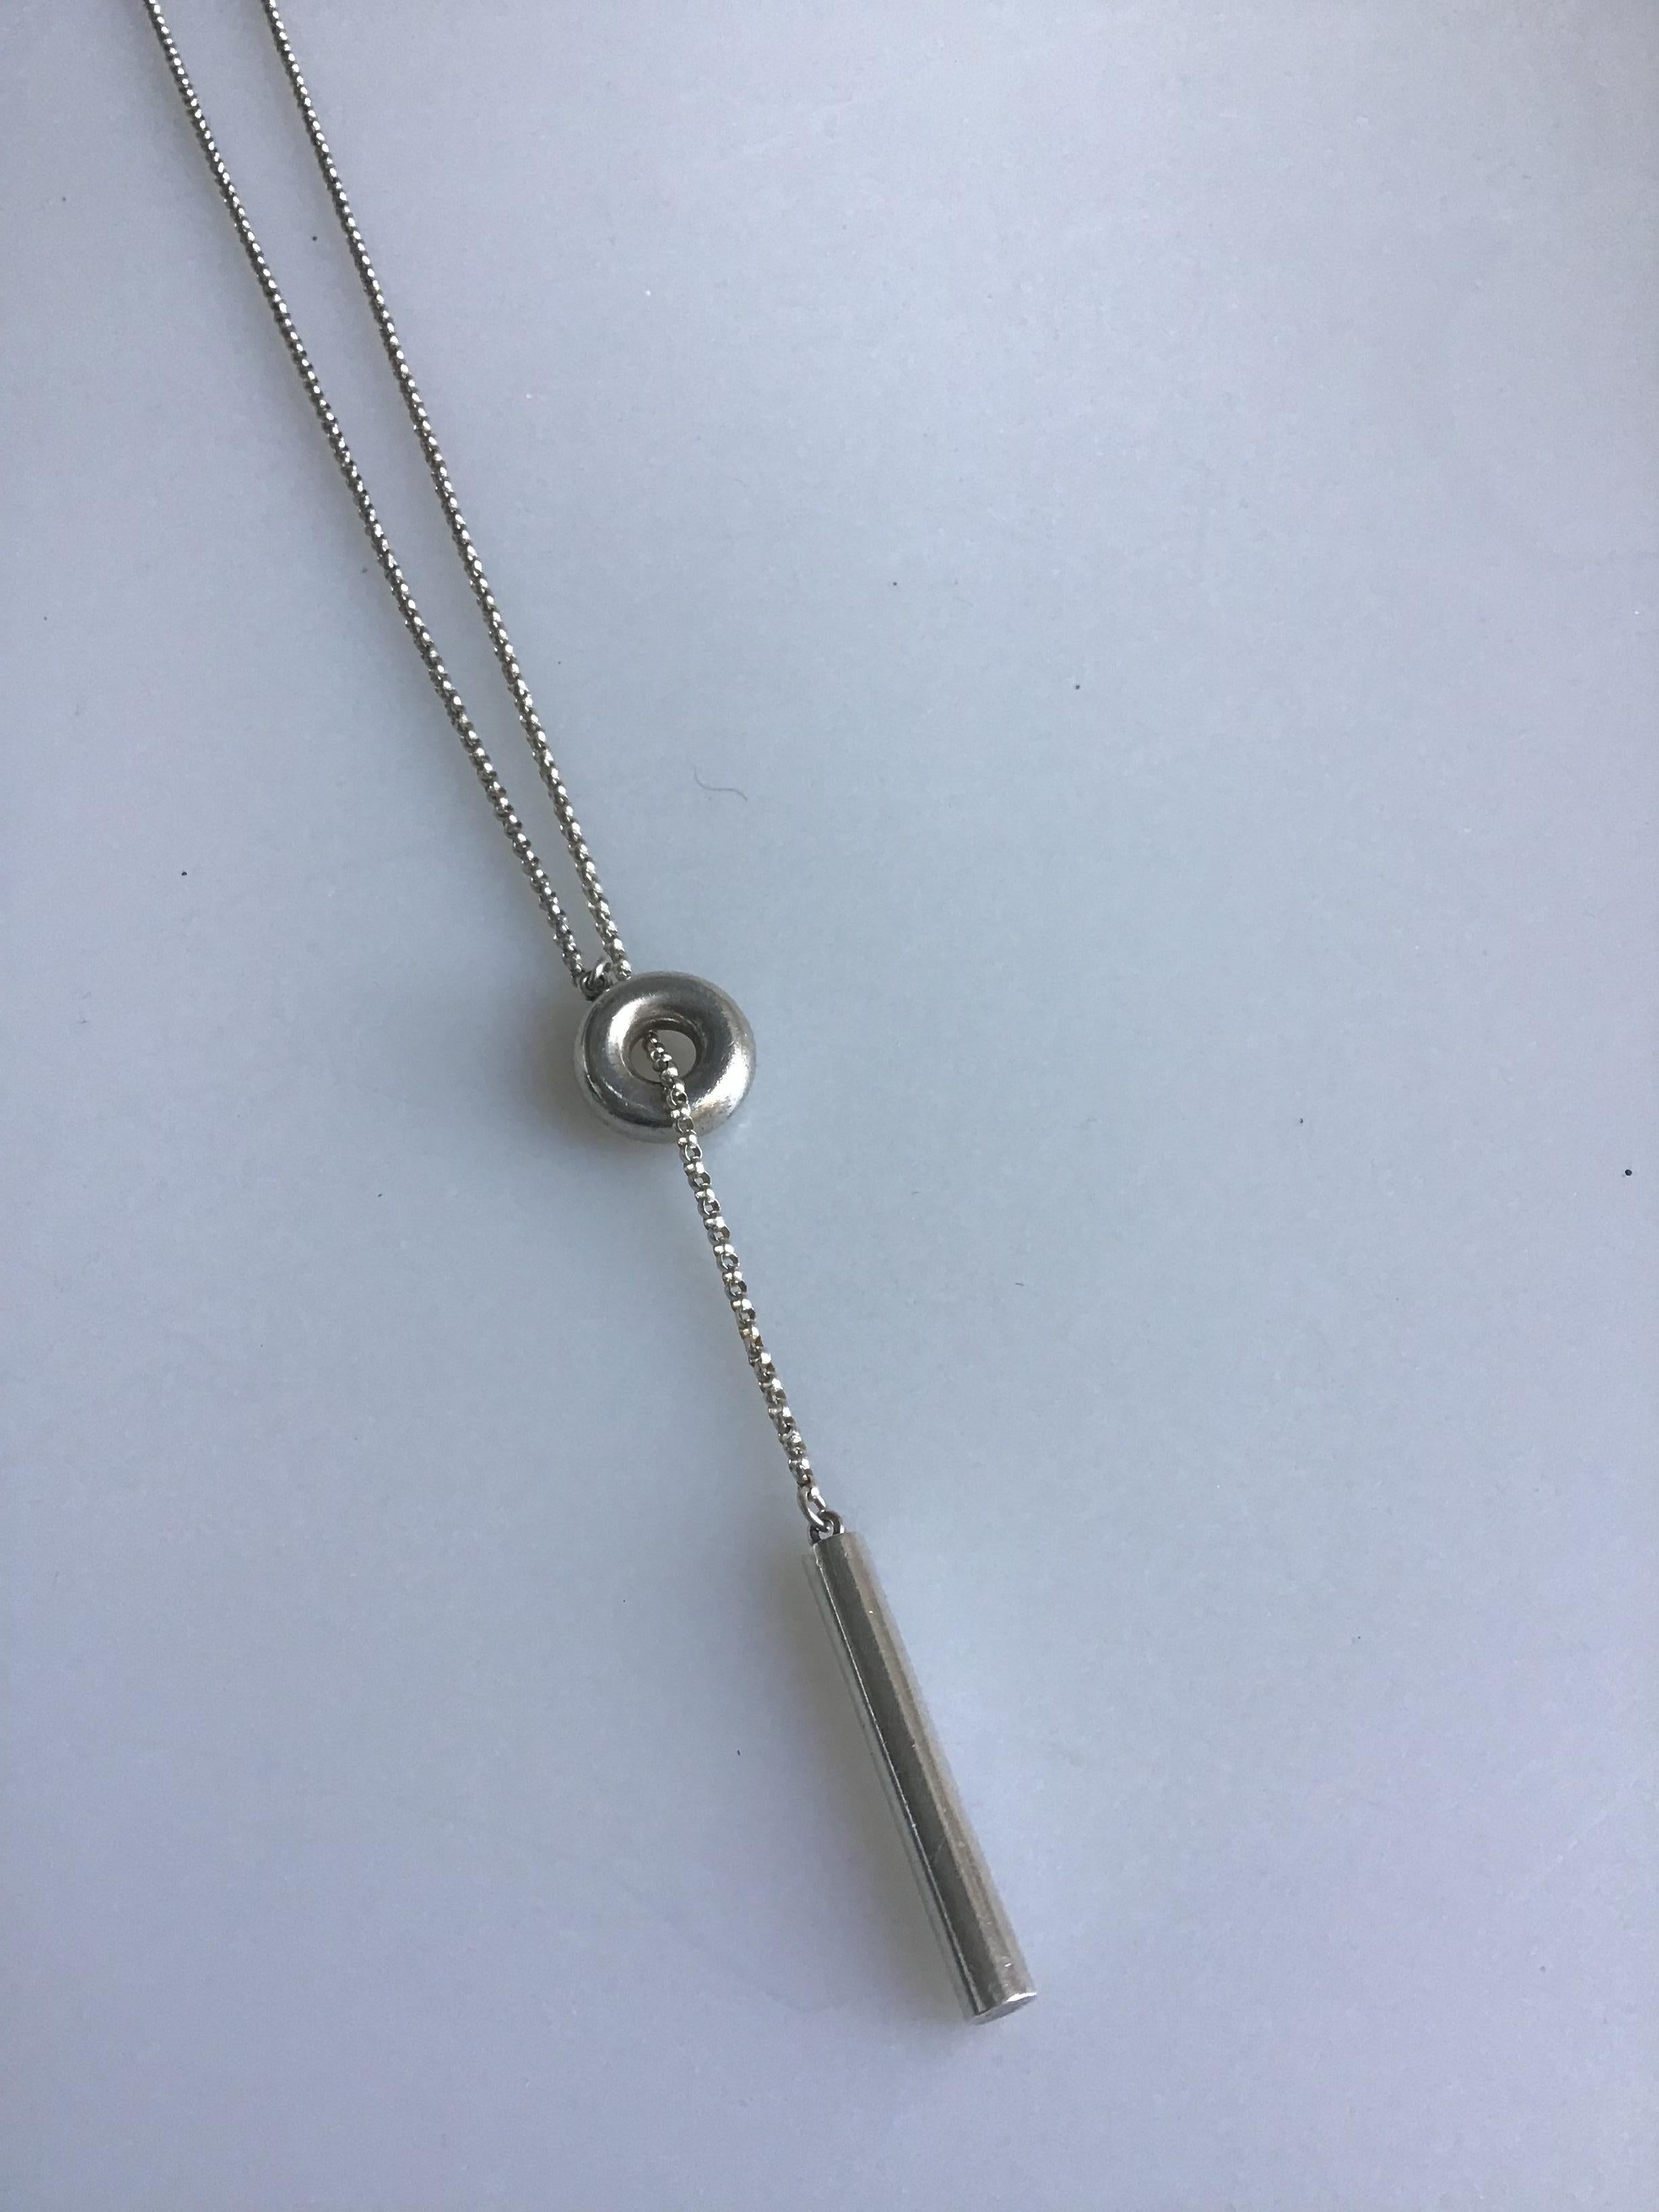 Georg Jensen Sterling Silver Necklace. Measures 80 cm / 31.5 in. Weighs 25.5 g / 0.9 oz.